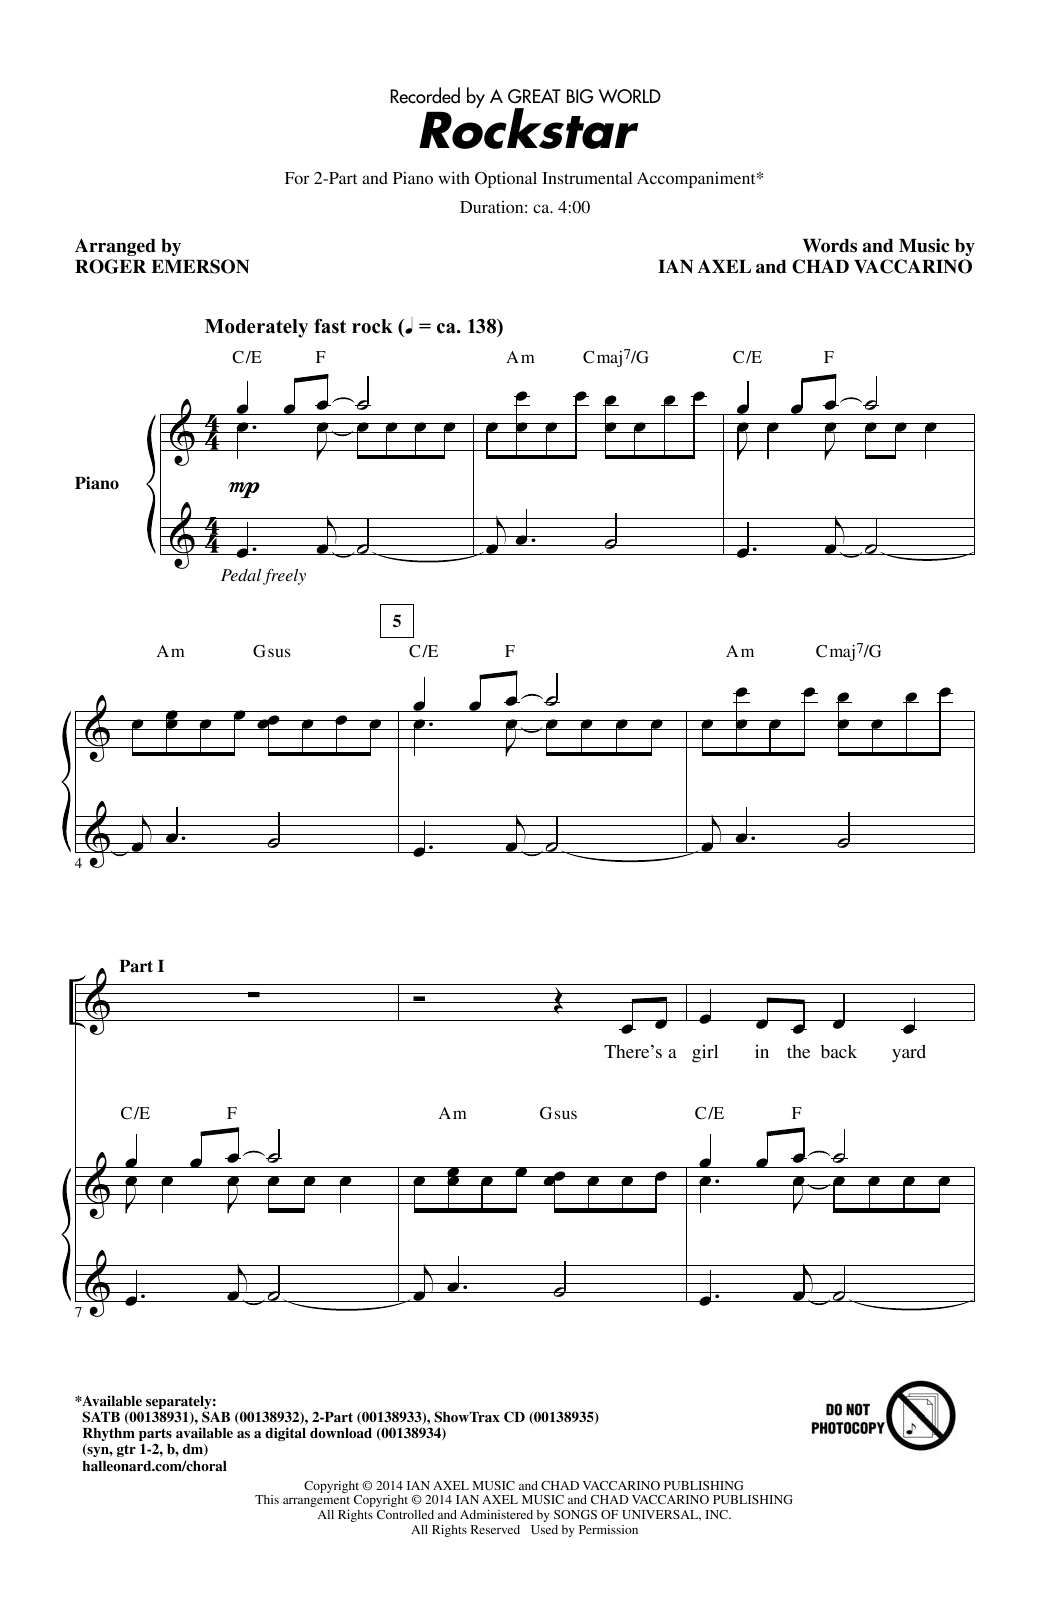 A Great Big World Rockstar (arr. Roger Emerson) sheet music notes and chords. Download Printable PDF.